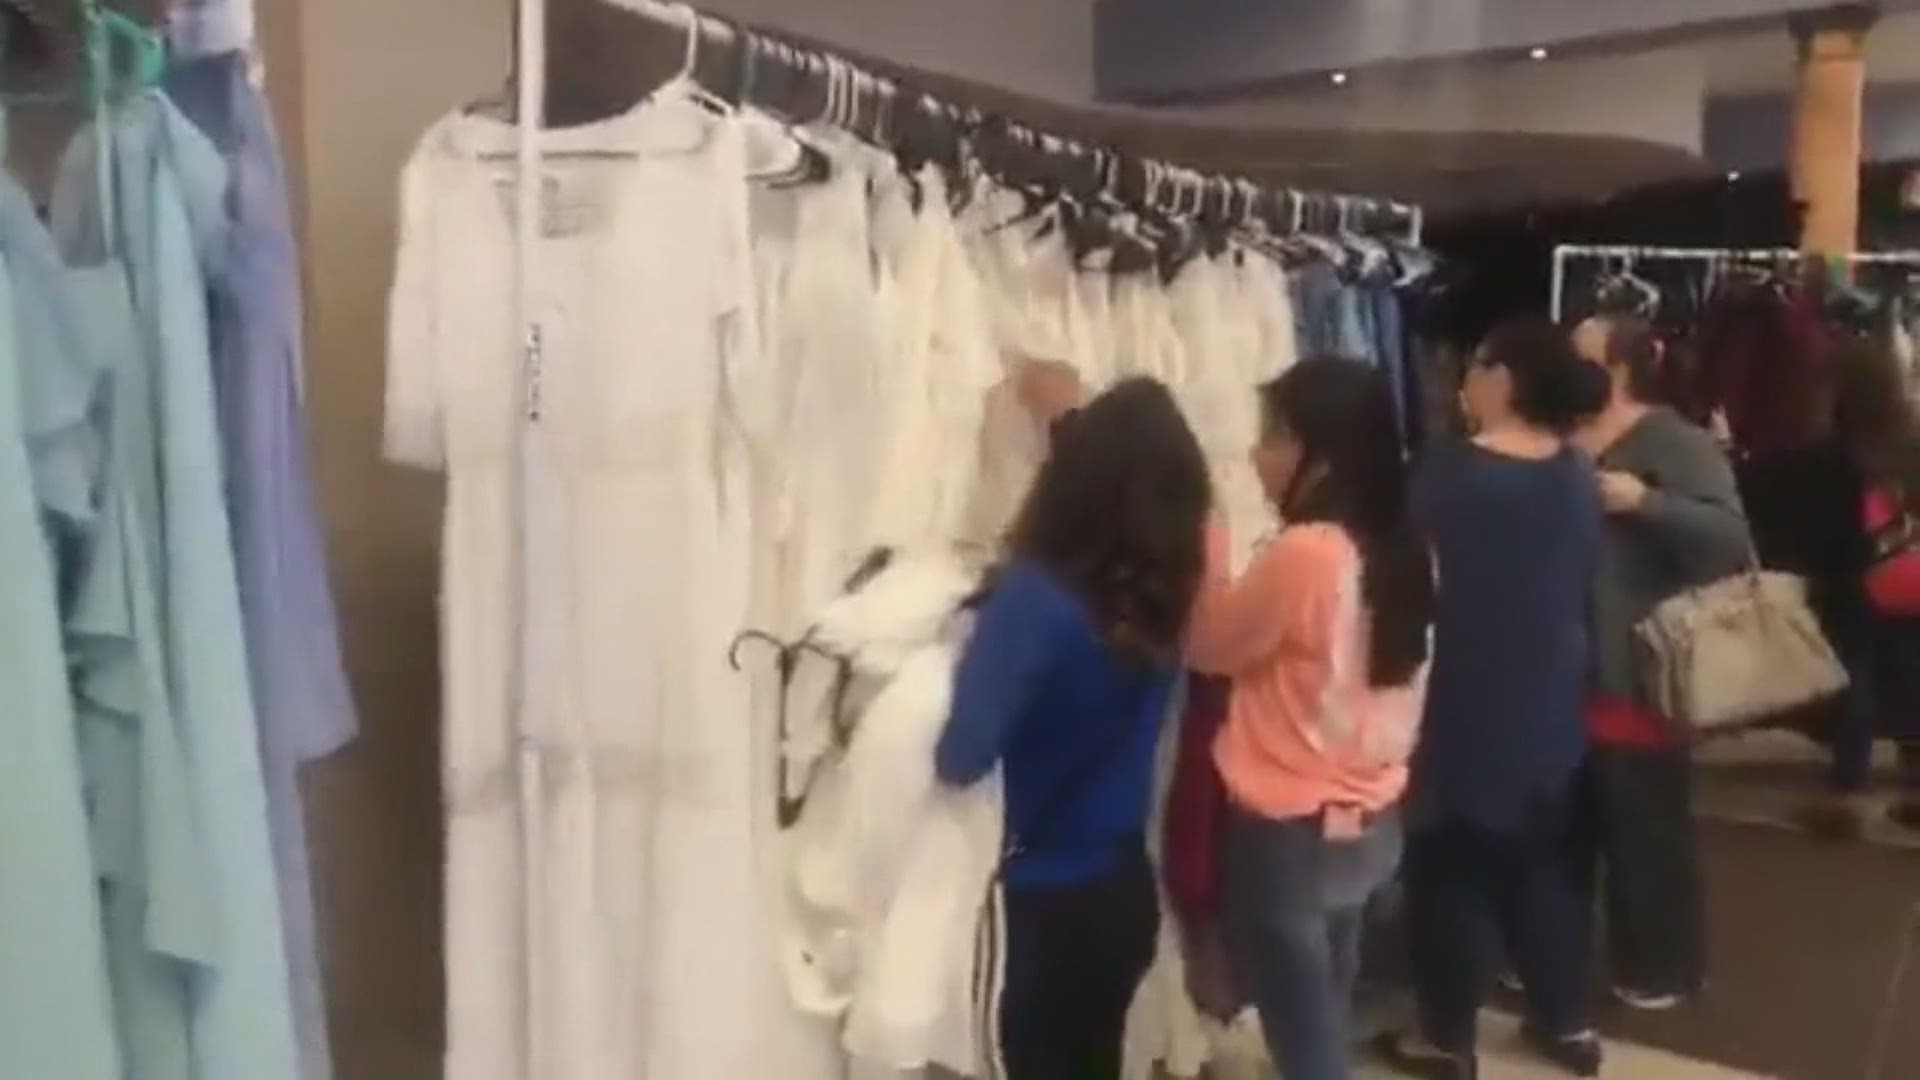 After its warehouse burnt in the Camp Fire, a nonprofit in Butte County needed a place to donate hundreds of new dresses and gowns, so it reached out to the Vida de Oro Foundation in Sacramento. 

On Saturday, the organization gave away more than 600 dresses to high school students in the Sacramento area.  

The dresses, which vary in sizes, were donated under the condition that they be given away and not sold by the nonprofit.